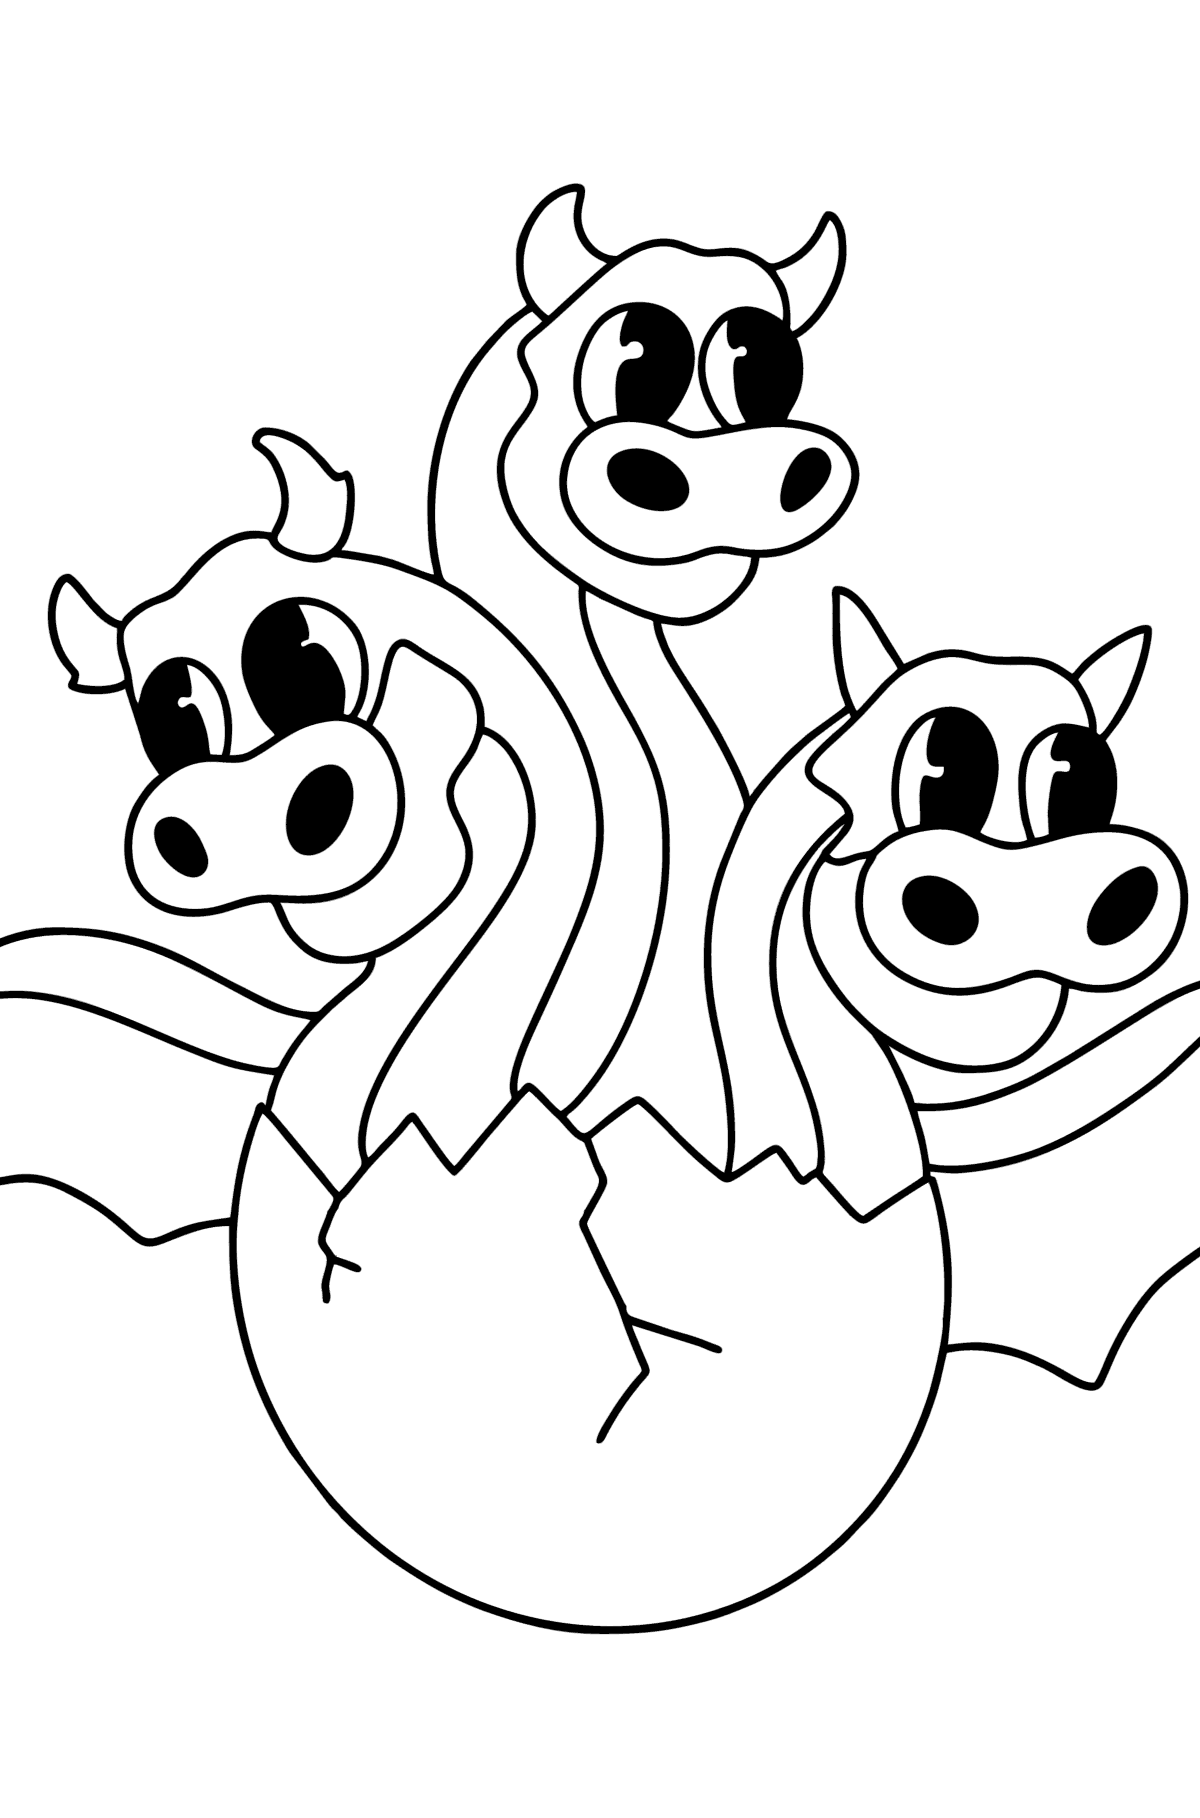 Dragon with three heads coloring page - Coloring Pages for Kids